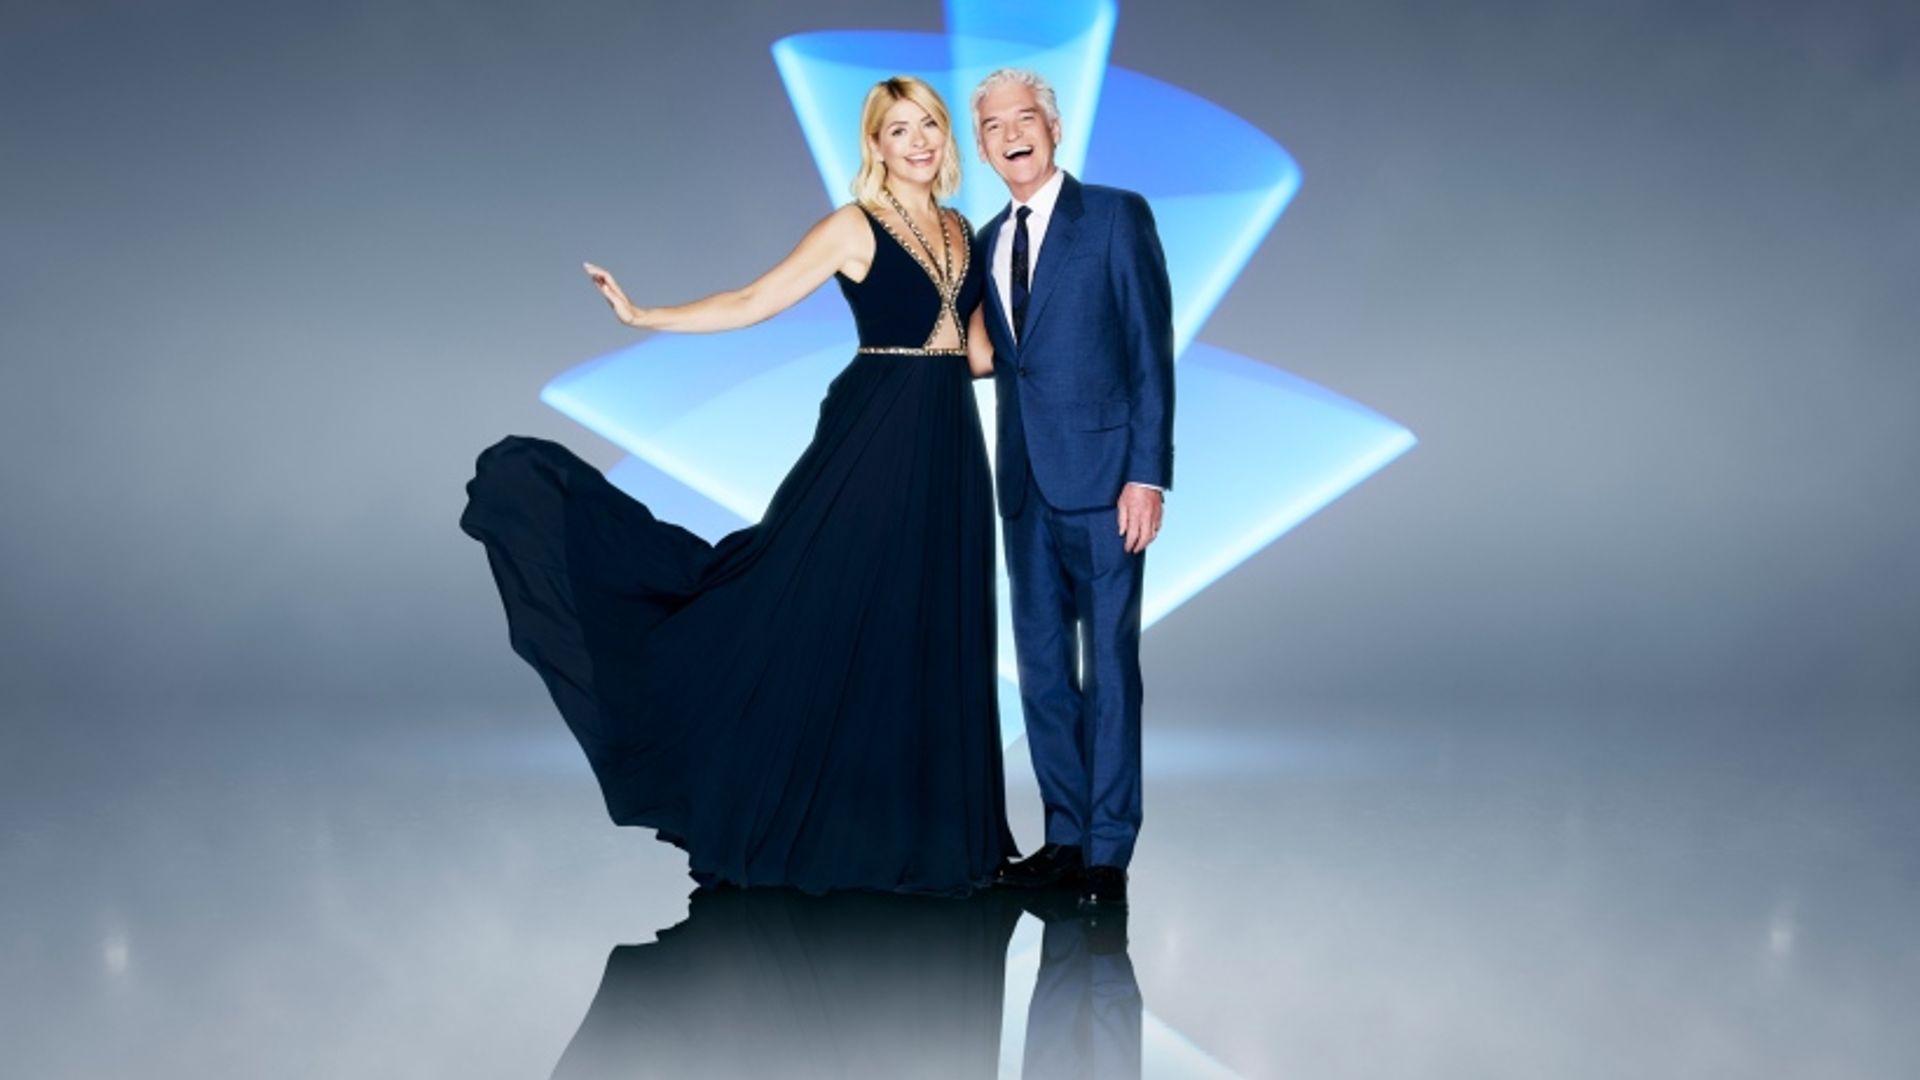 First look at Dancing on Ice 2019 is finally here! See the photos